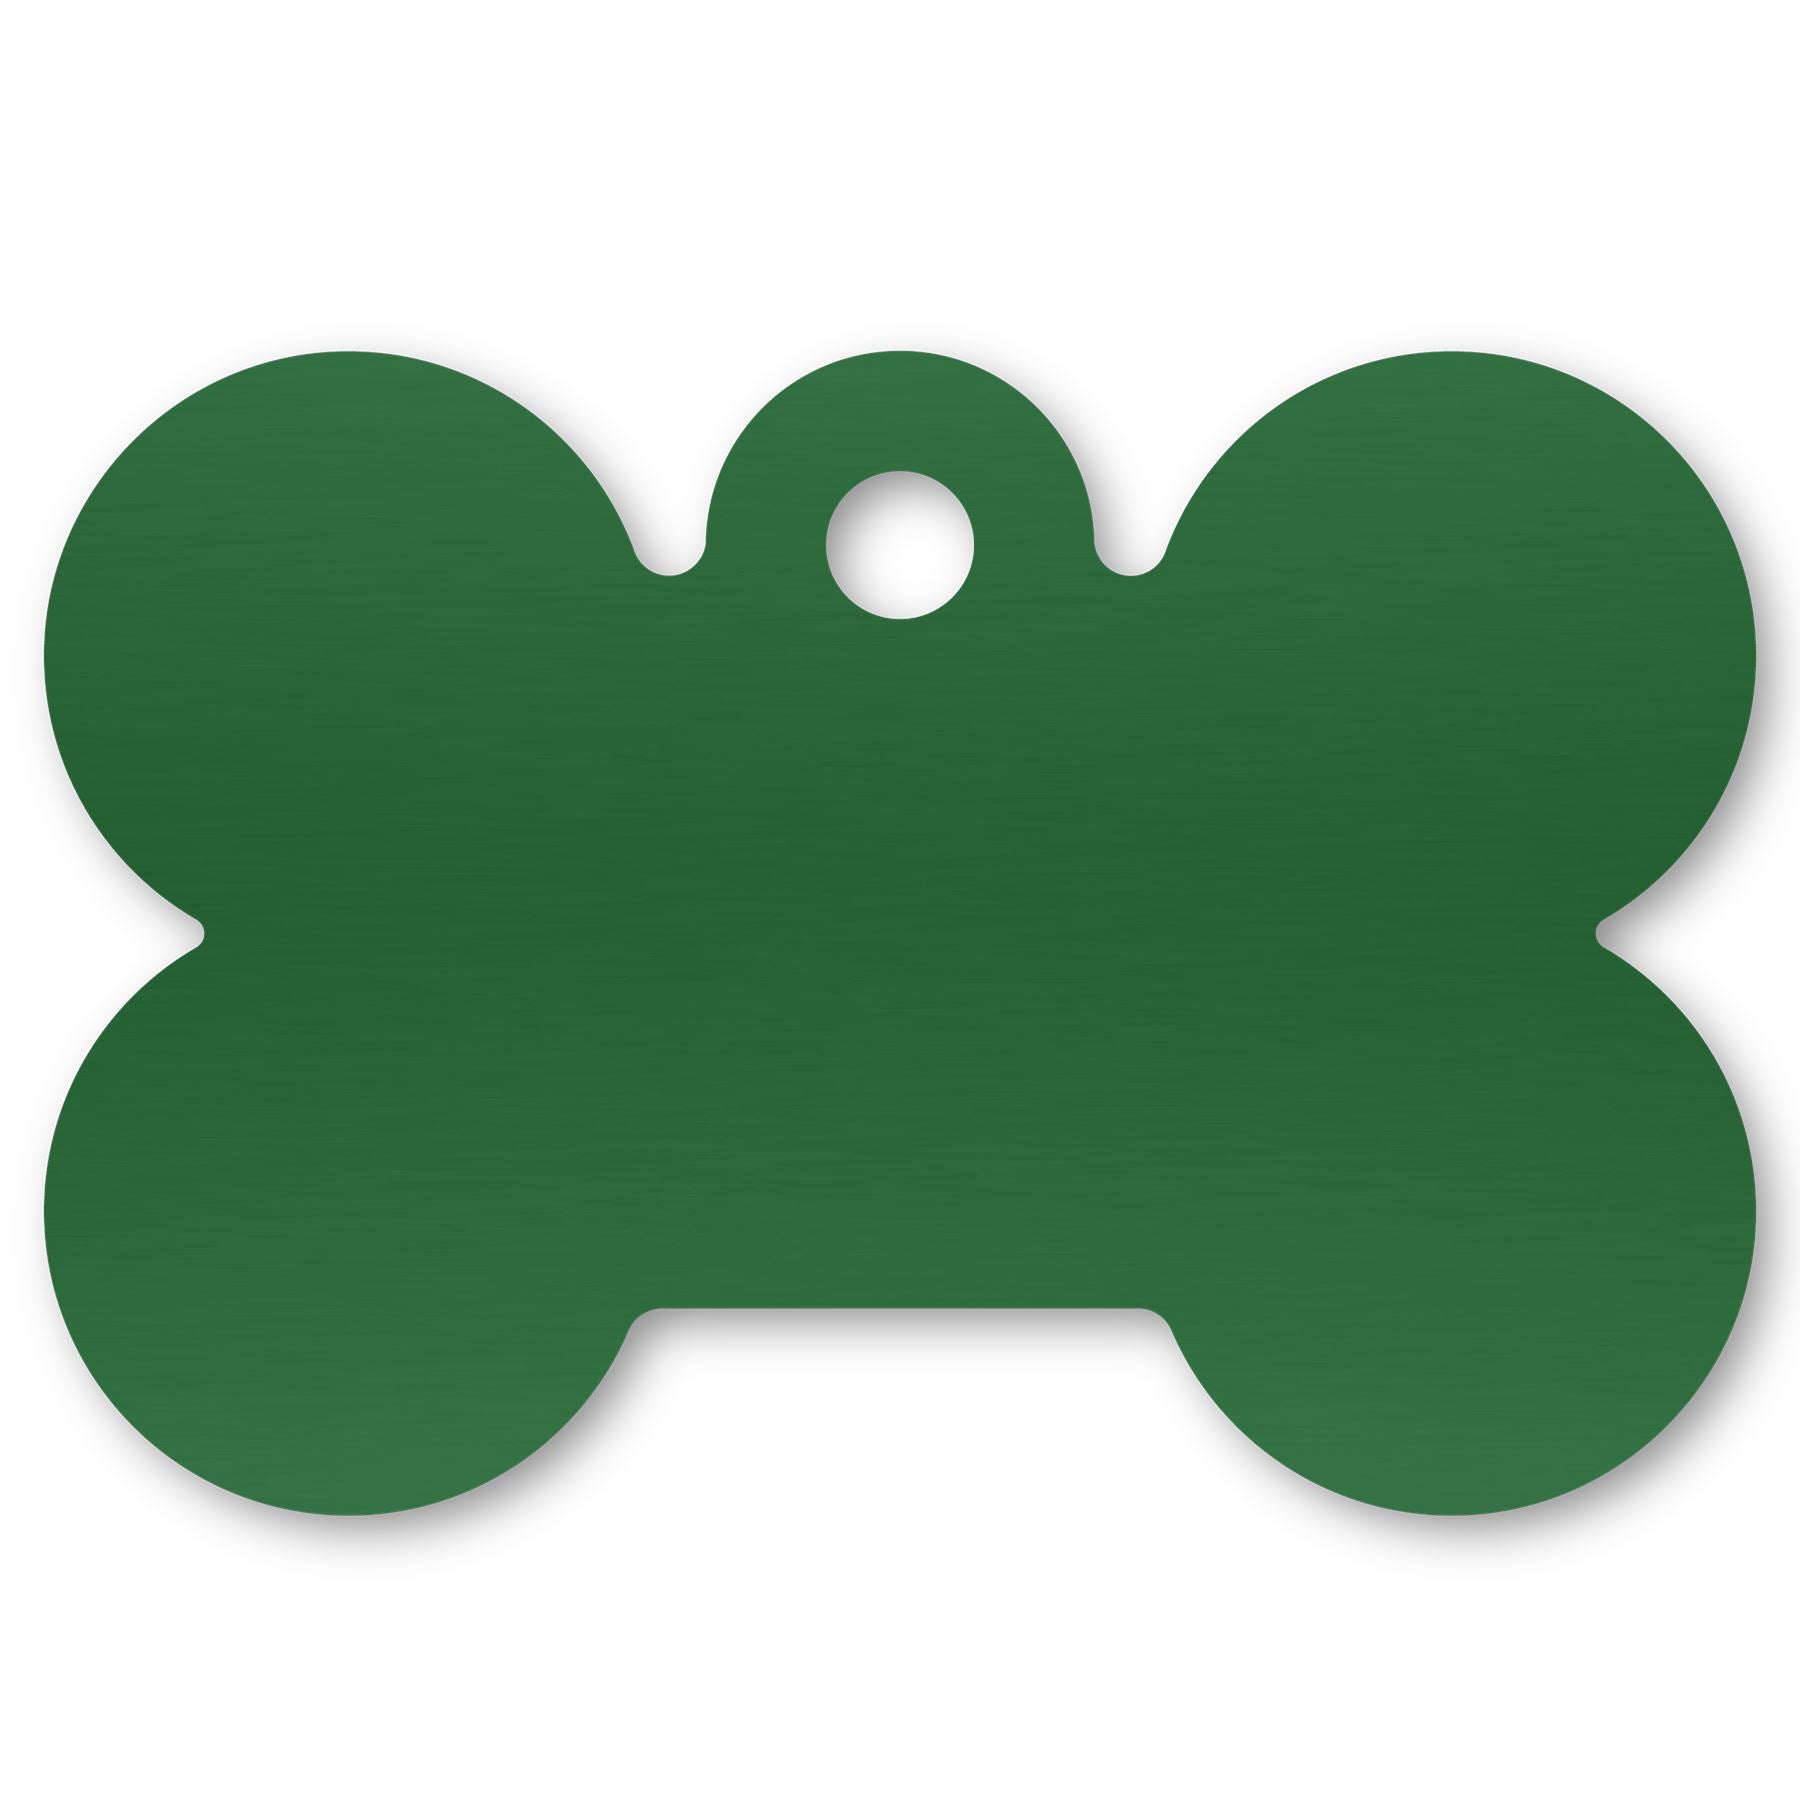 Anodized Aluminum Dog Bone Shaped Tags, 1-1/32" x 1-5/16" with 1/8" Hole, Laser Engraved Metal Tags Craftworks NW Green 